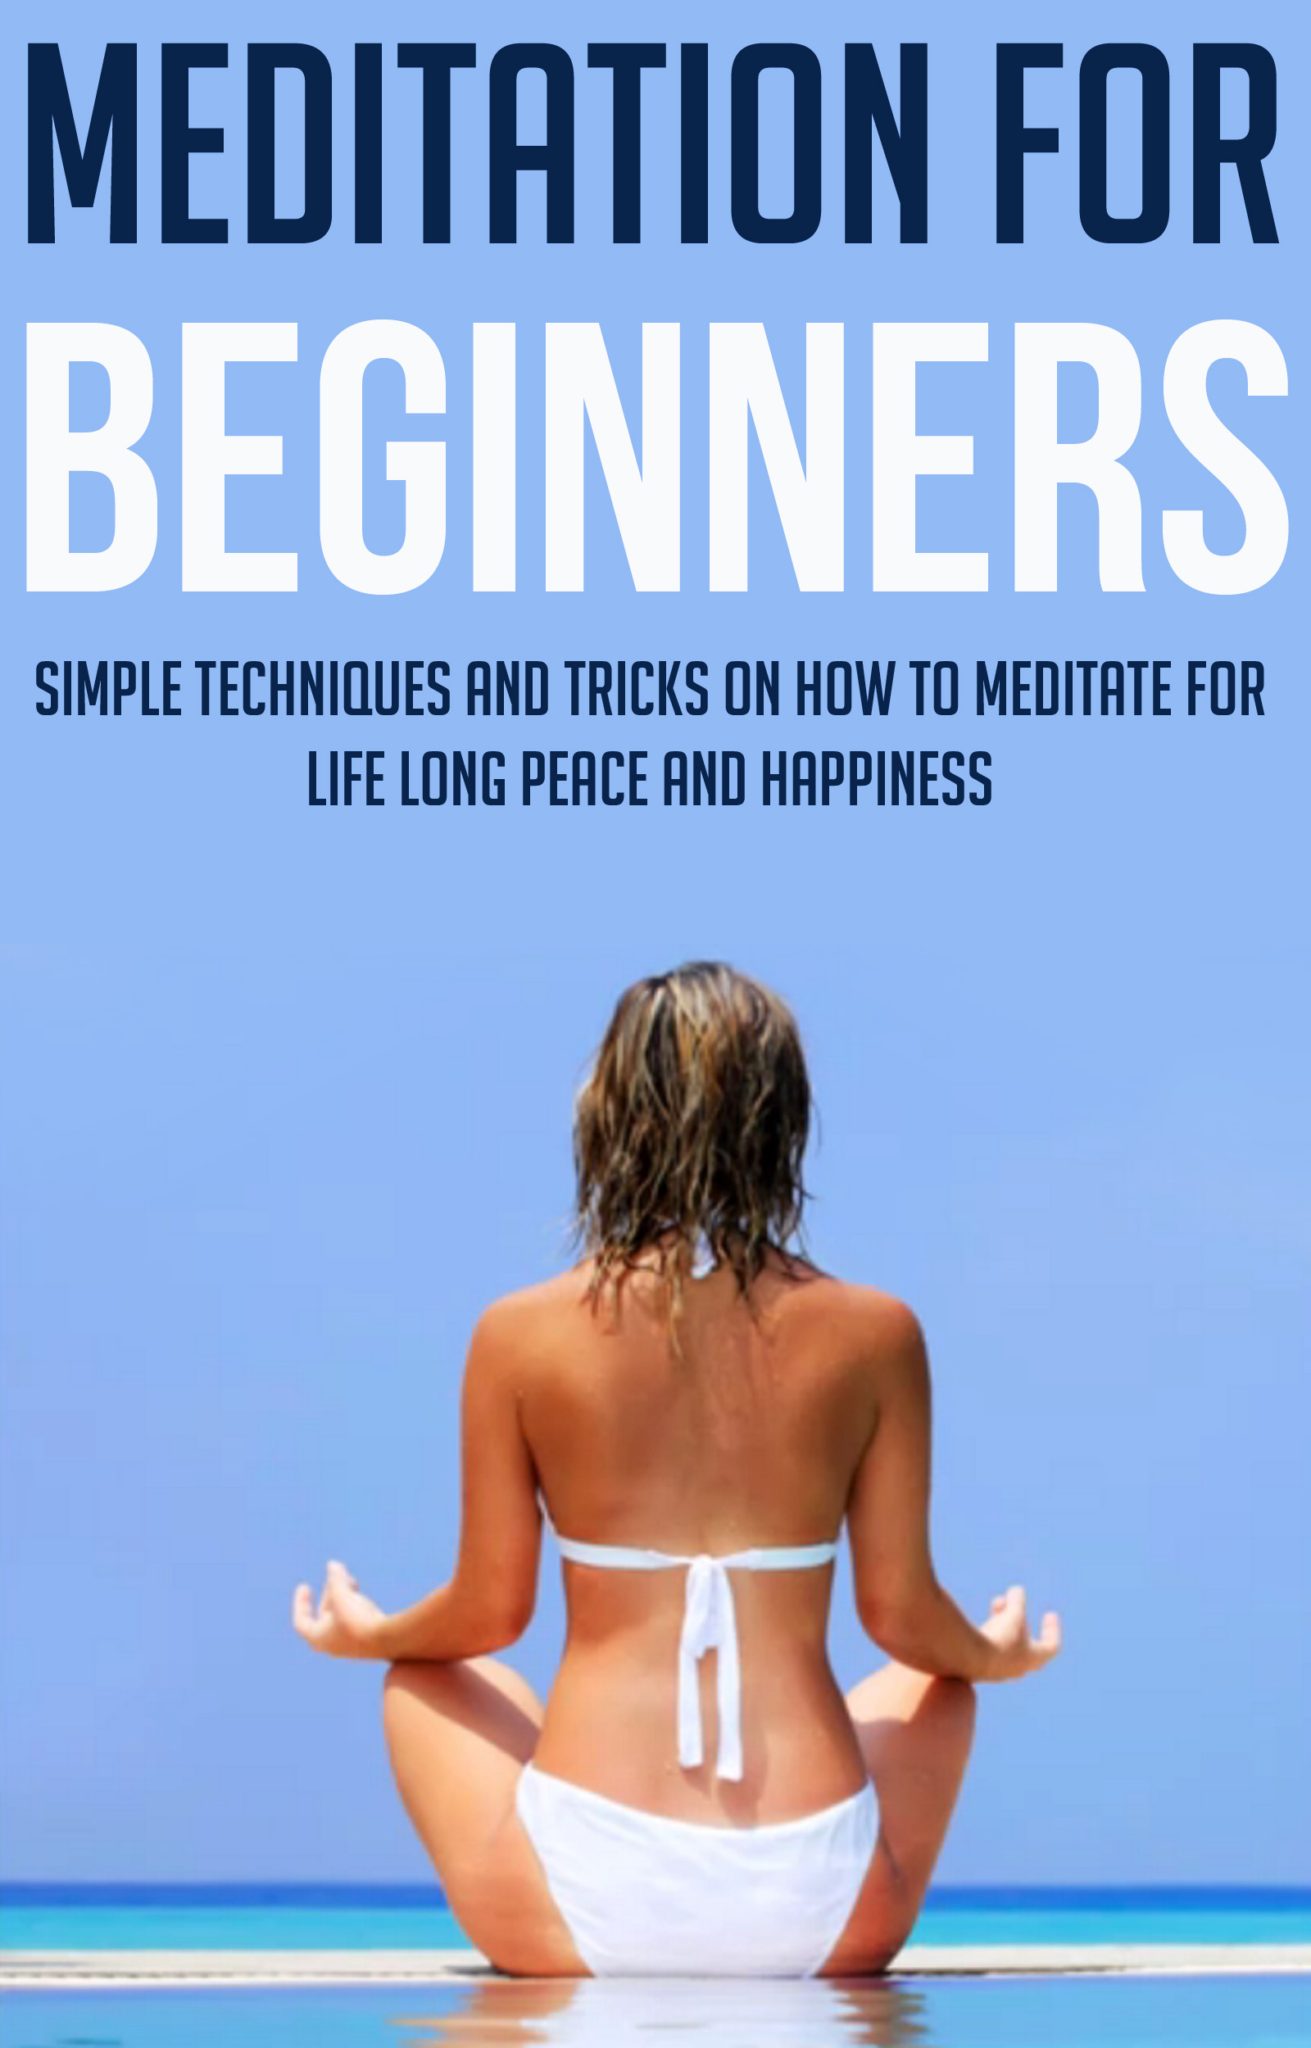 Meditation For Beginners: Simple Techniques And Tricks On How To Meditate For Life-Long Peace And Happiness by Ashley Leesburg